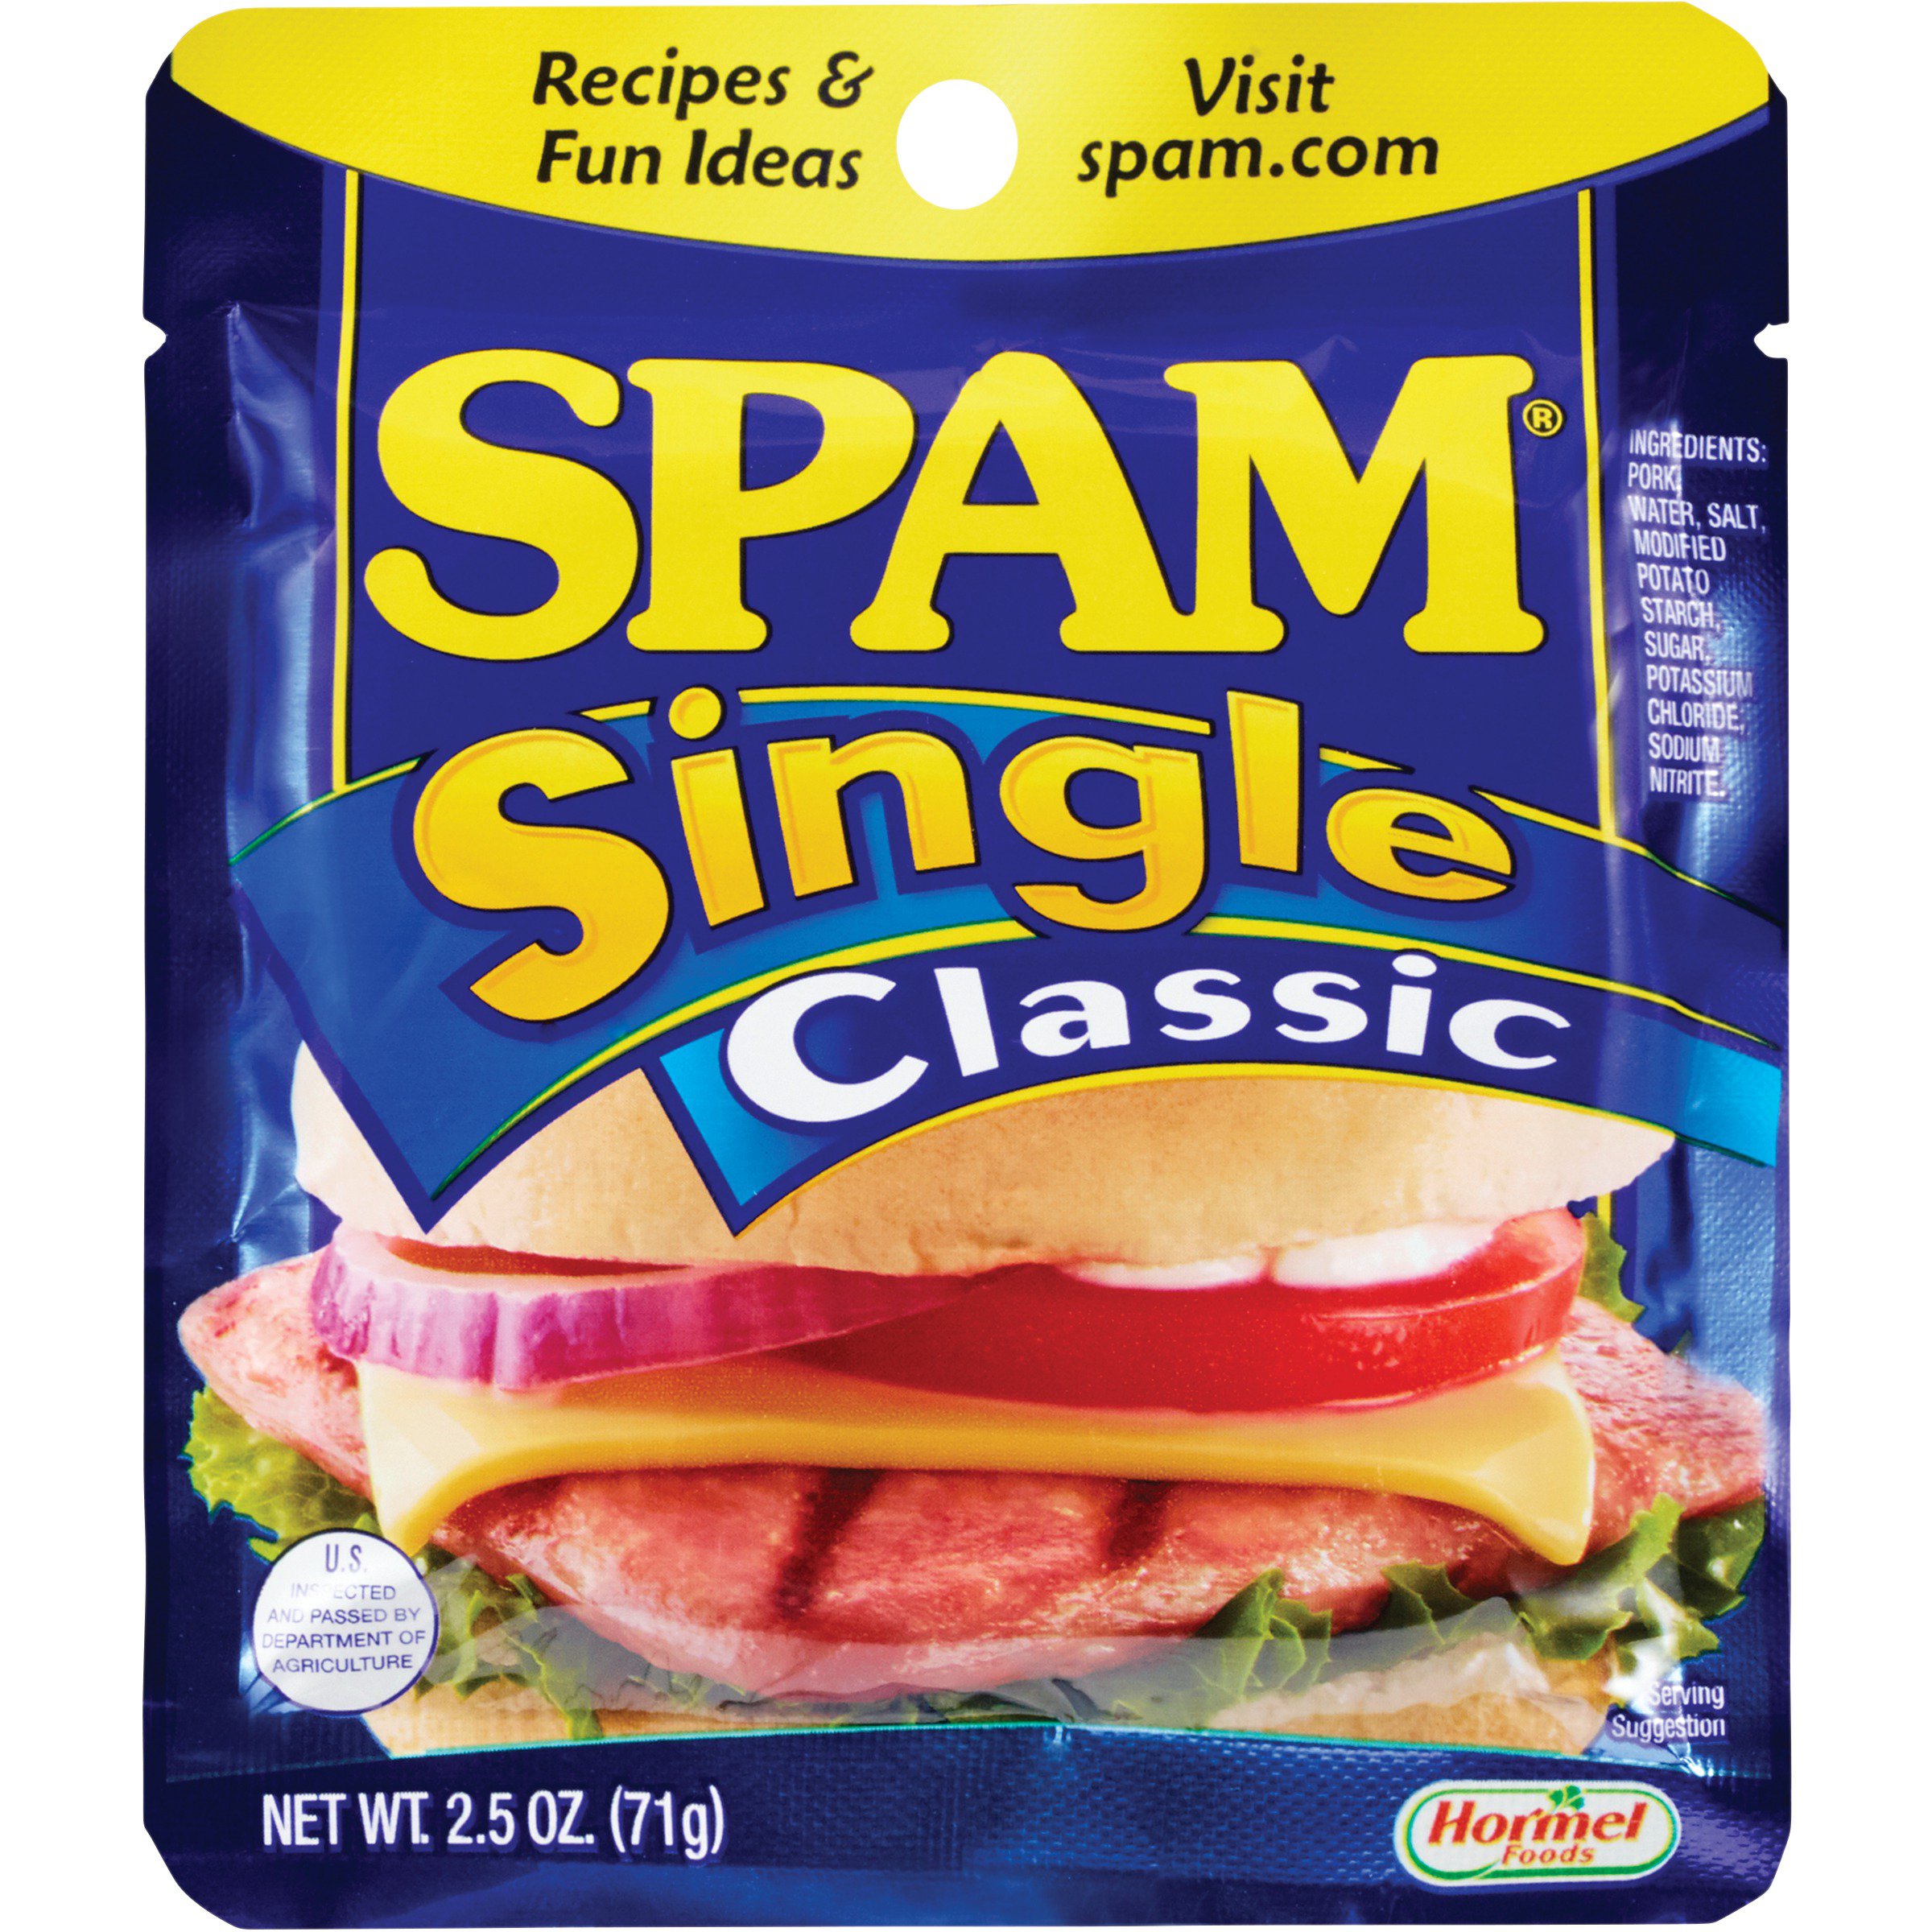 Spam Oven Roasted Turkey - Shop Meat at H-E-B